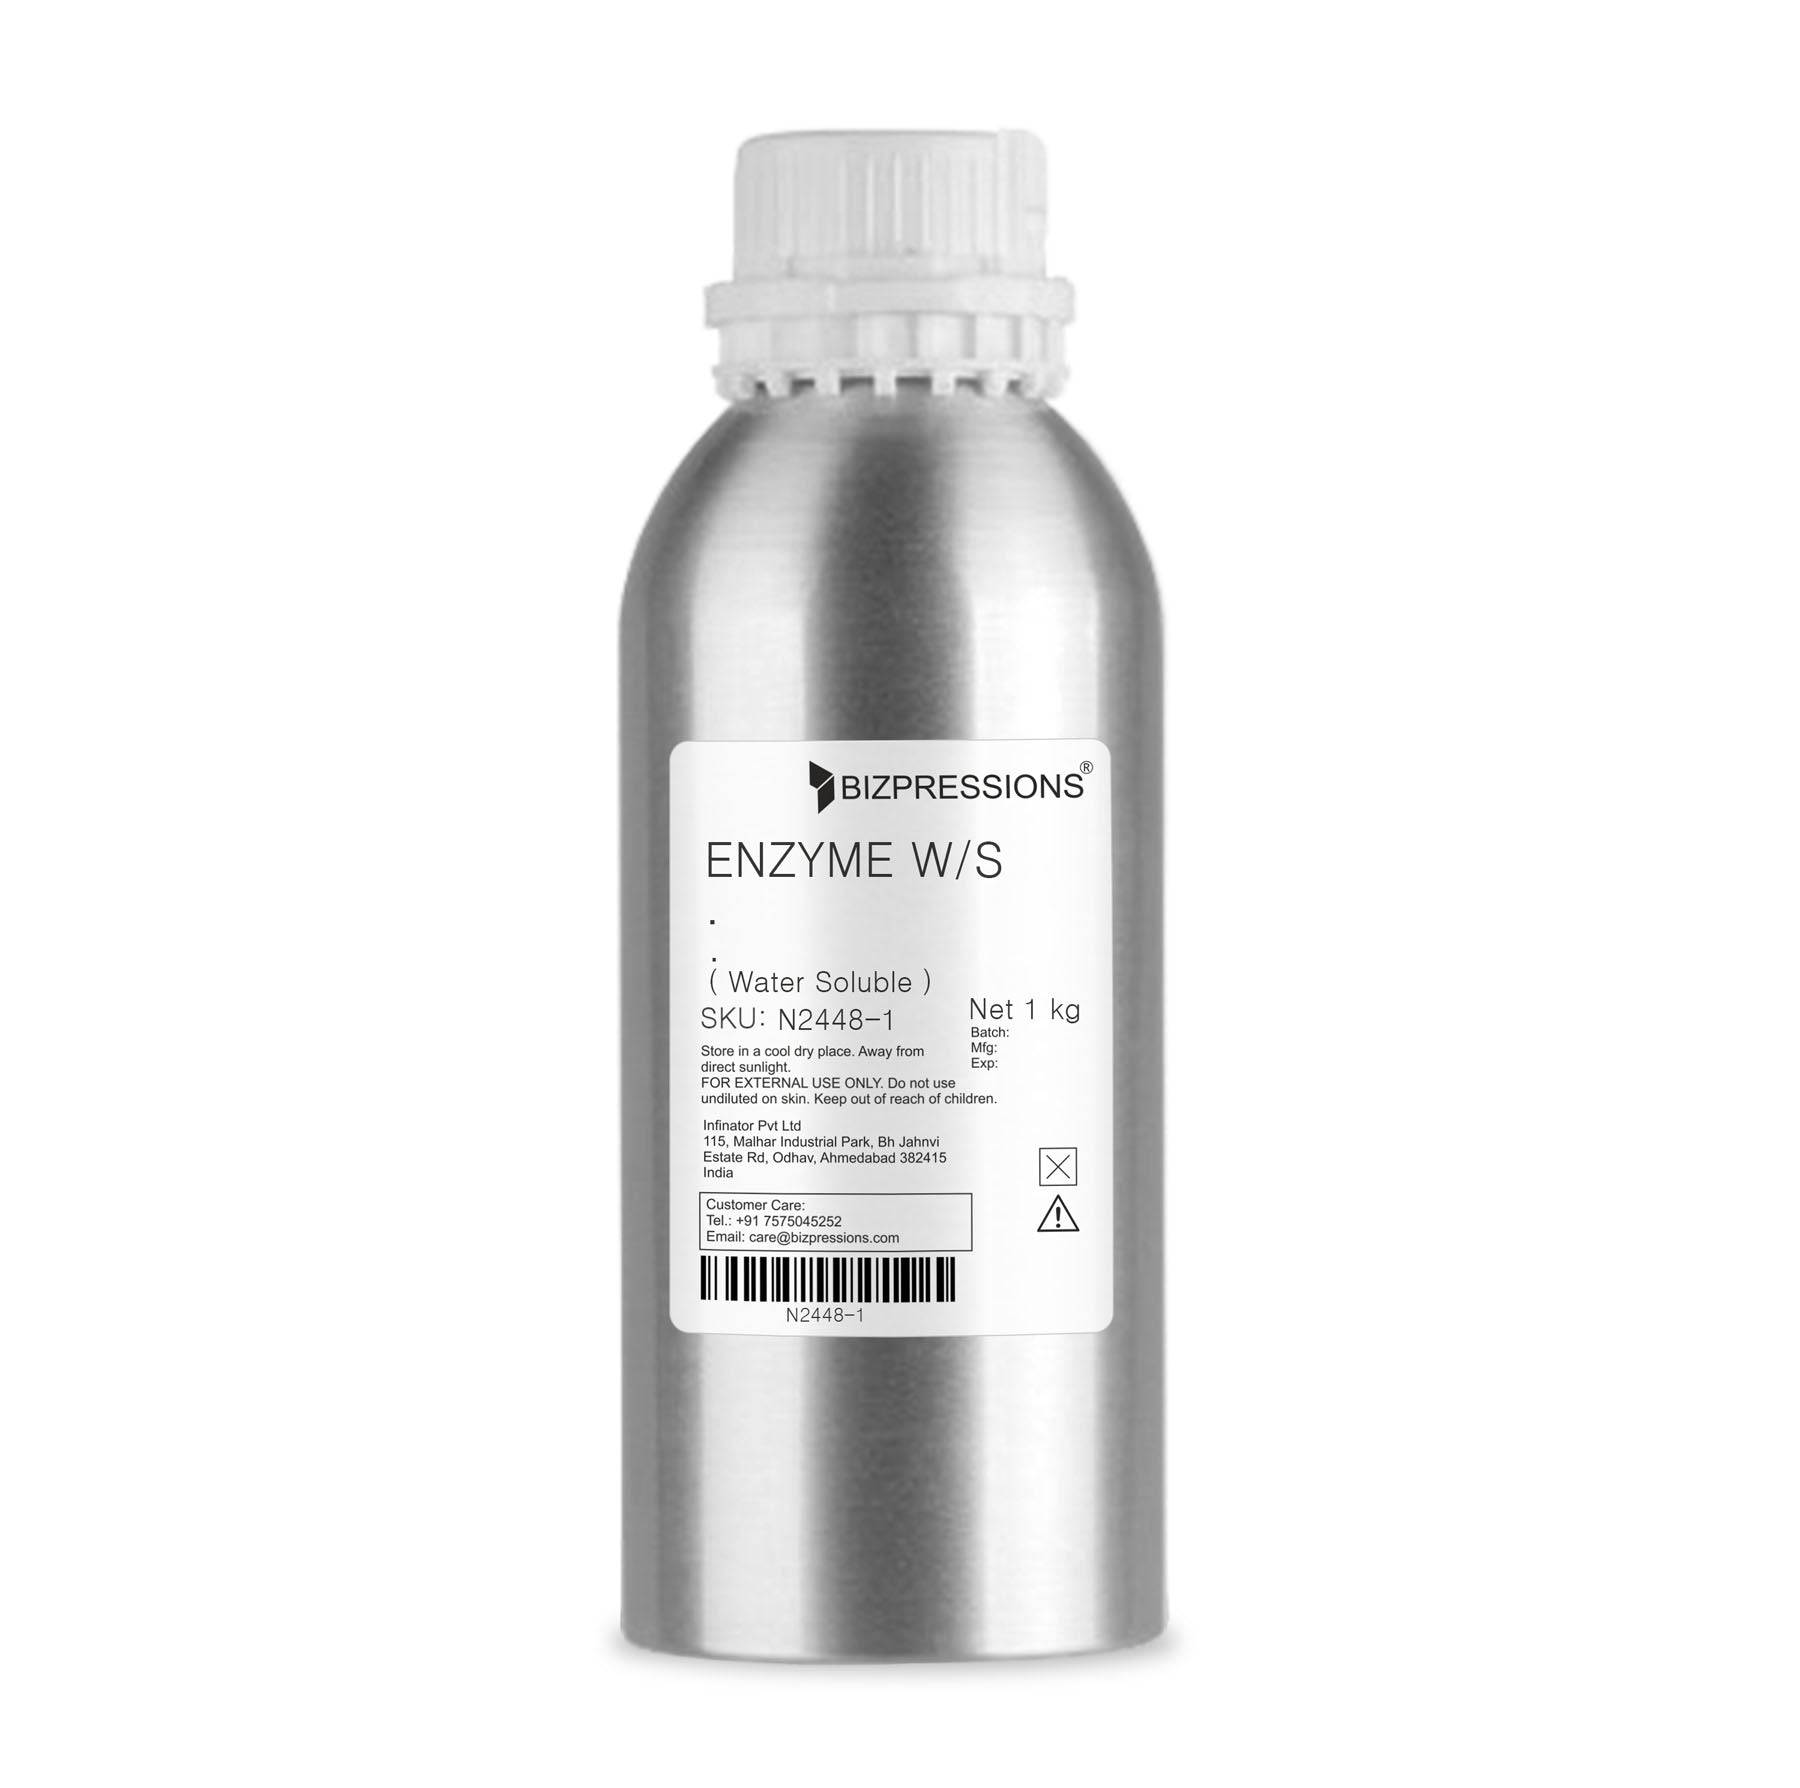 ENZYME W/S - Fragrance ( Water Soluble ) - 1 kg